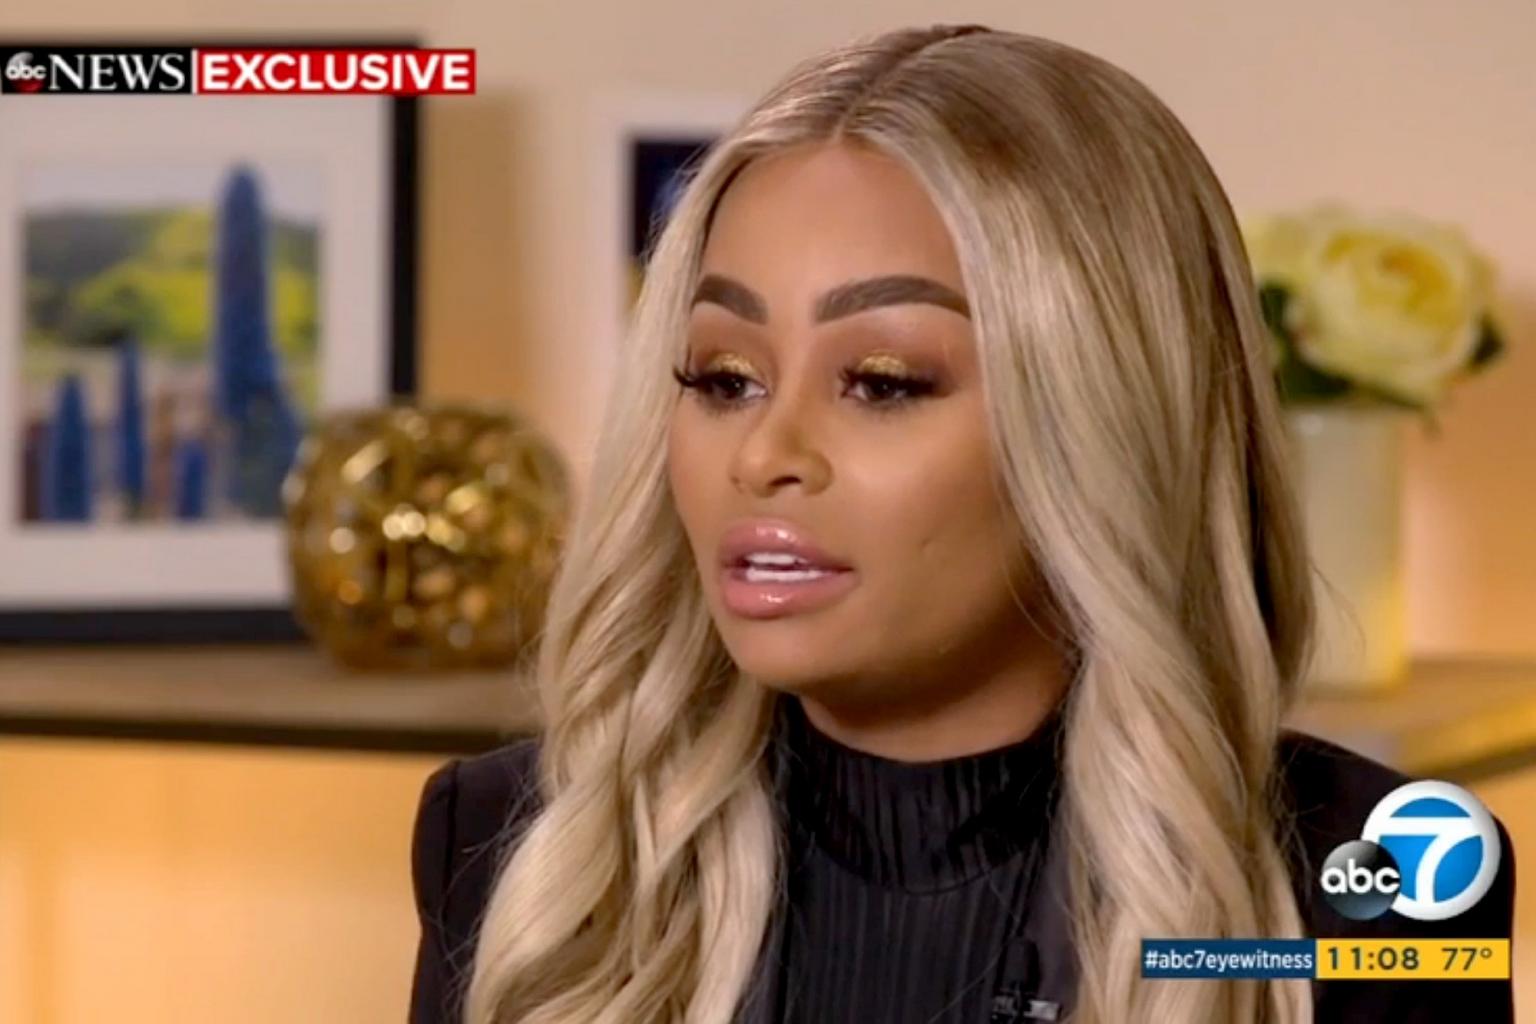 Blac Chyna Is        Devastated      '  After Ex Rob Kardashian Posted Naked Pictures of Her on    Instagram